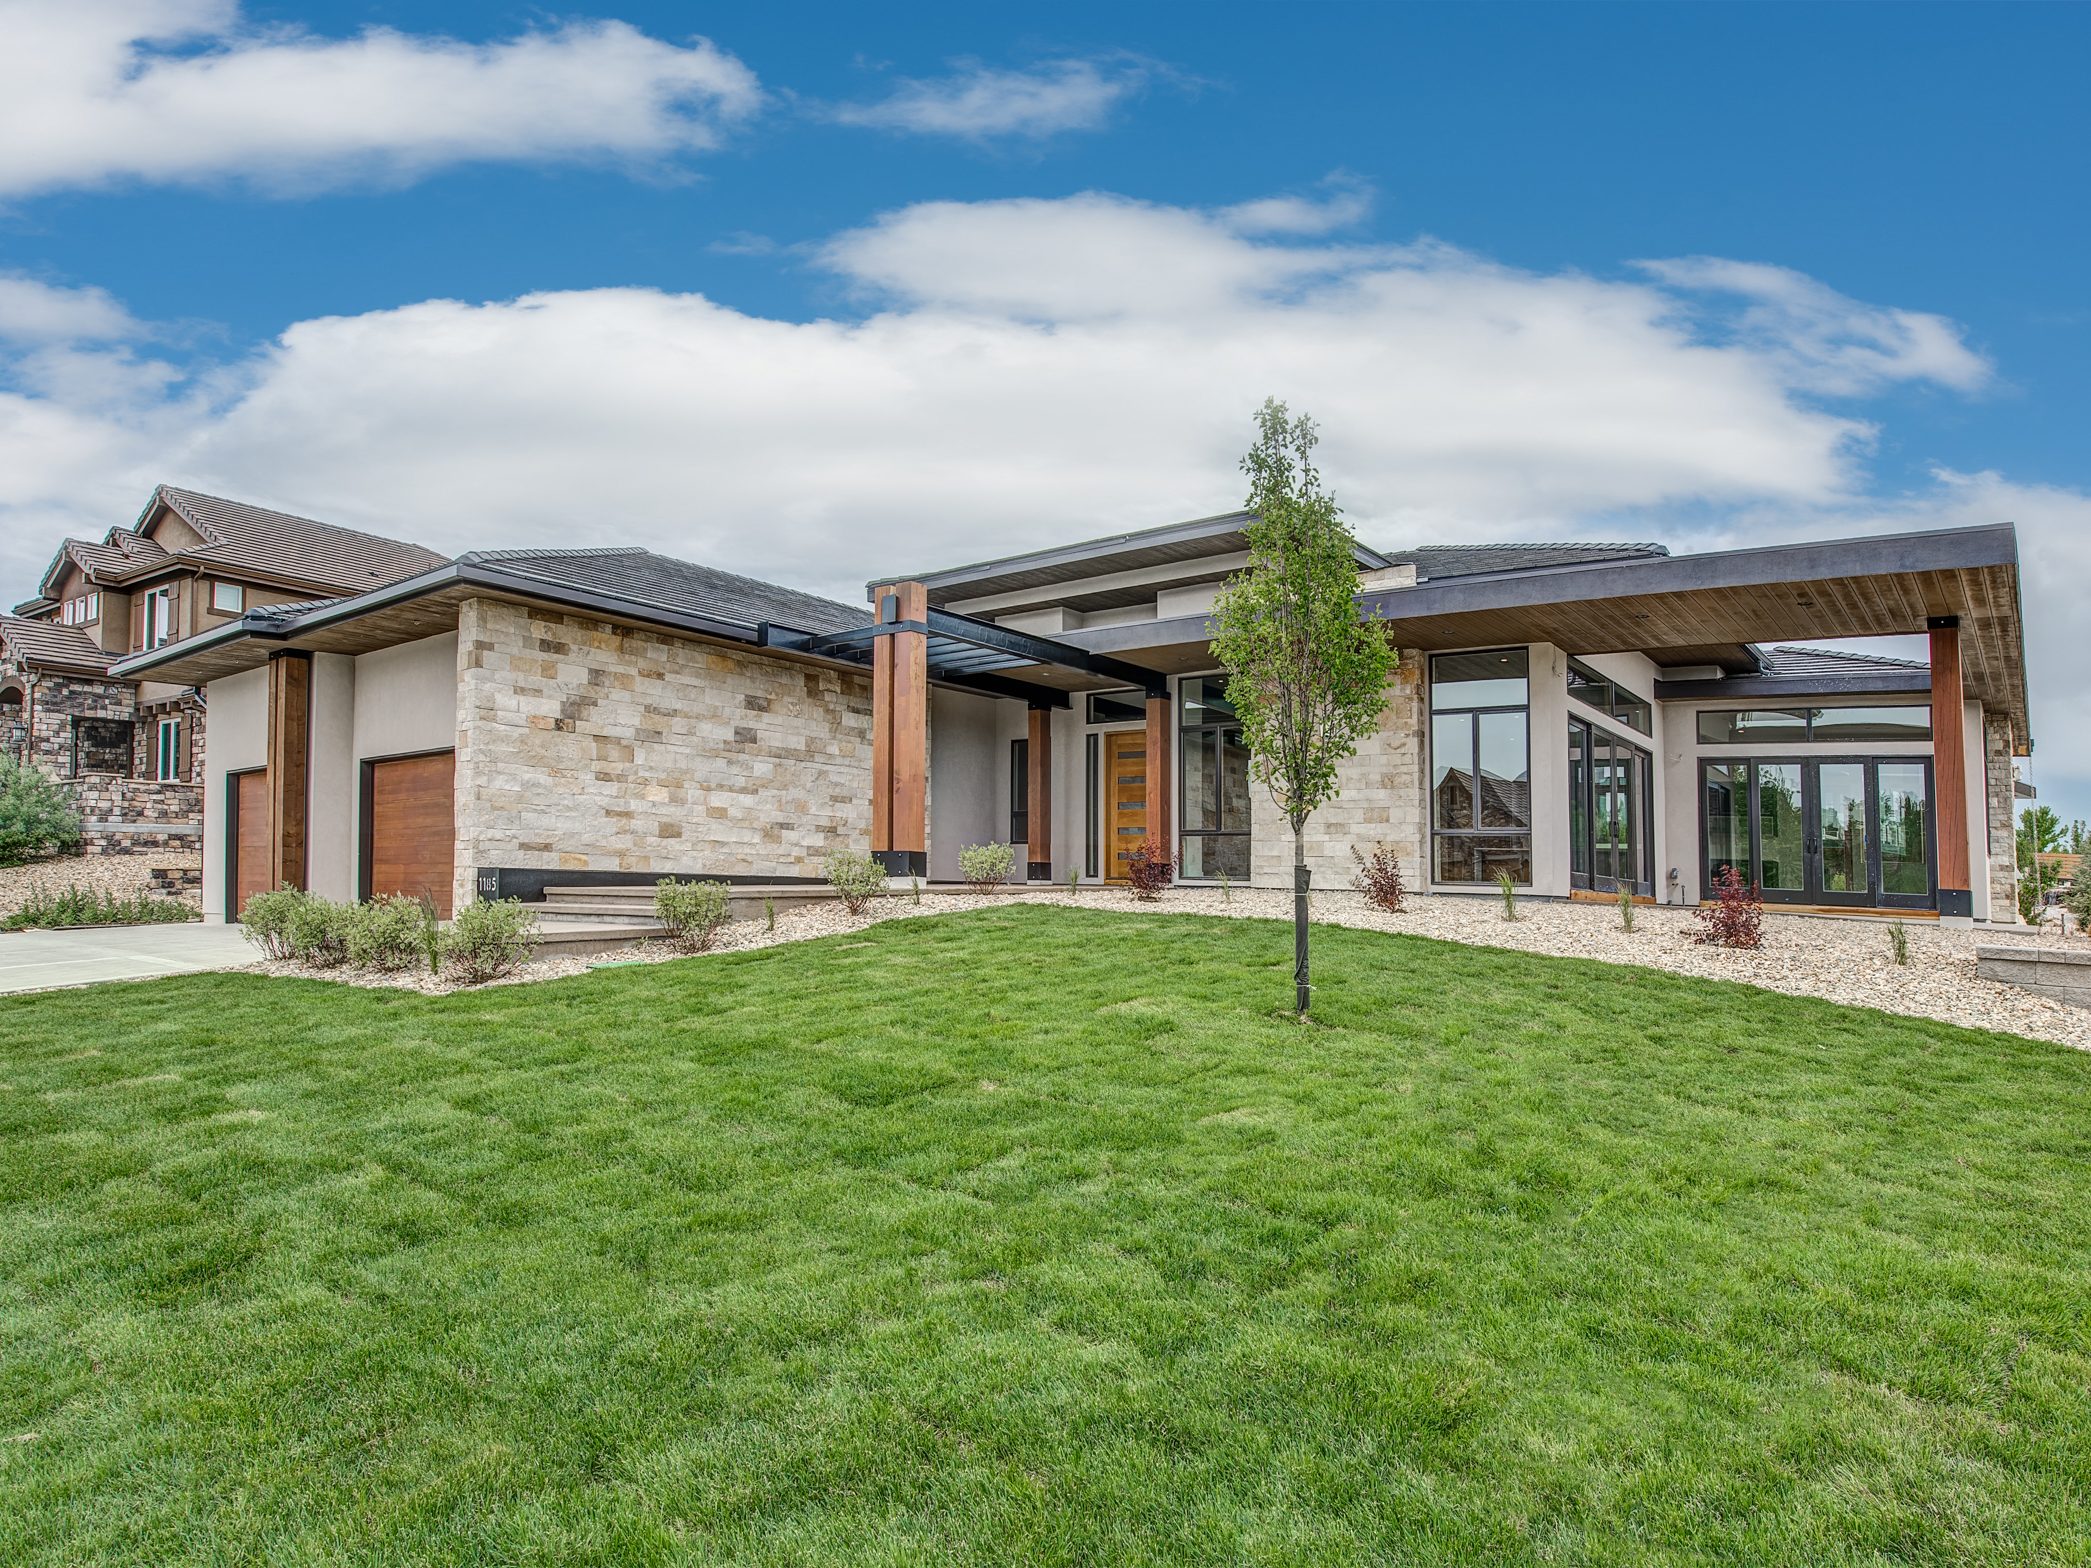 1185 West 141st Circle, Westminster, CO. Listed for sale by LIV Sotheby’s International Realty for $1,625,000.